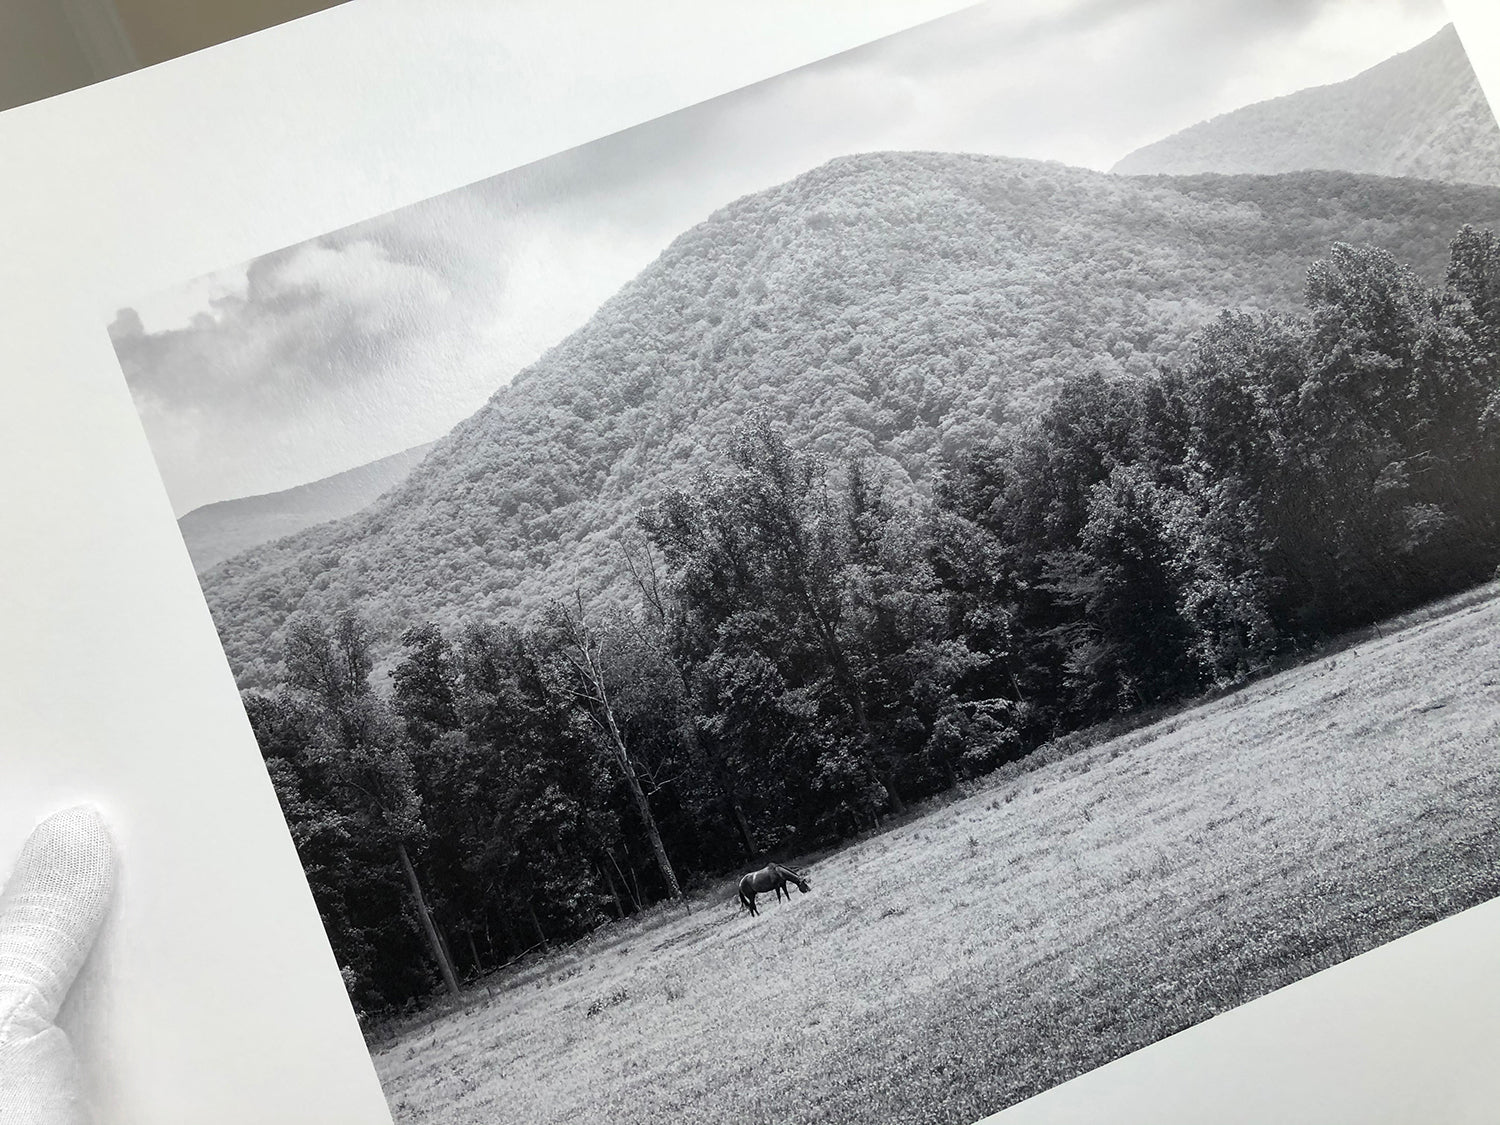 Black and white photograph of a horse grazing in the Smoky Mountains, printed on museum-quality baryta surface fine art paper.